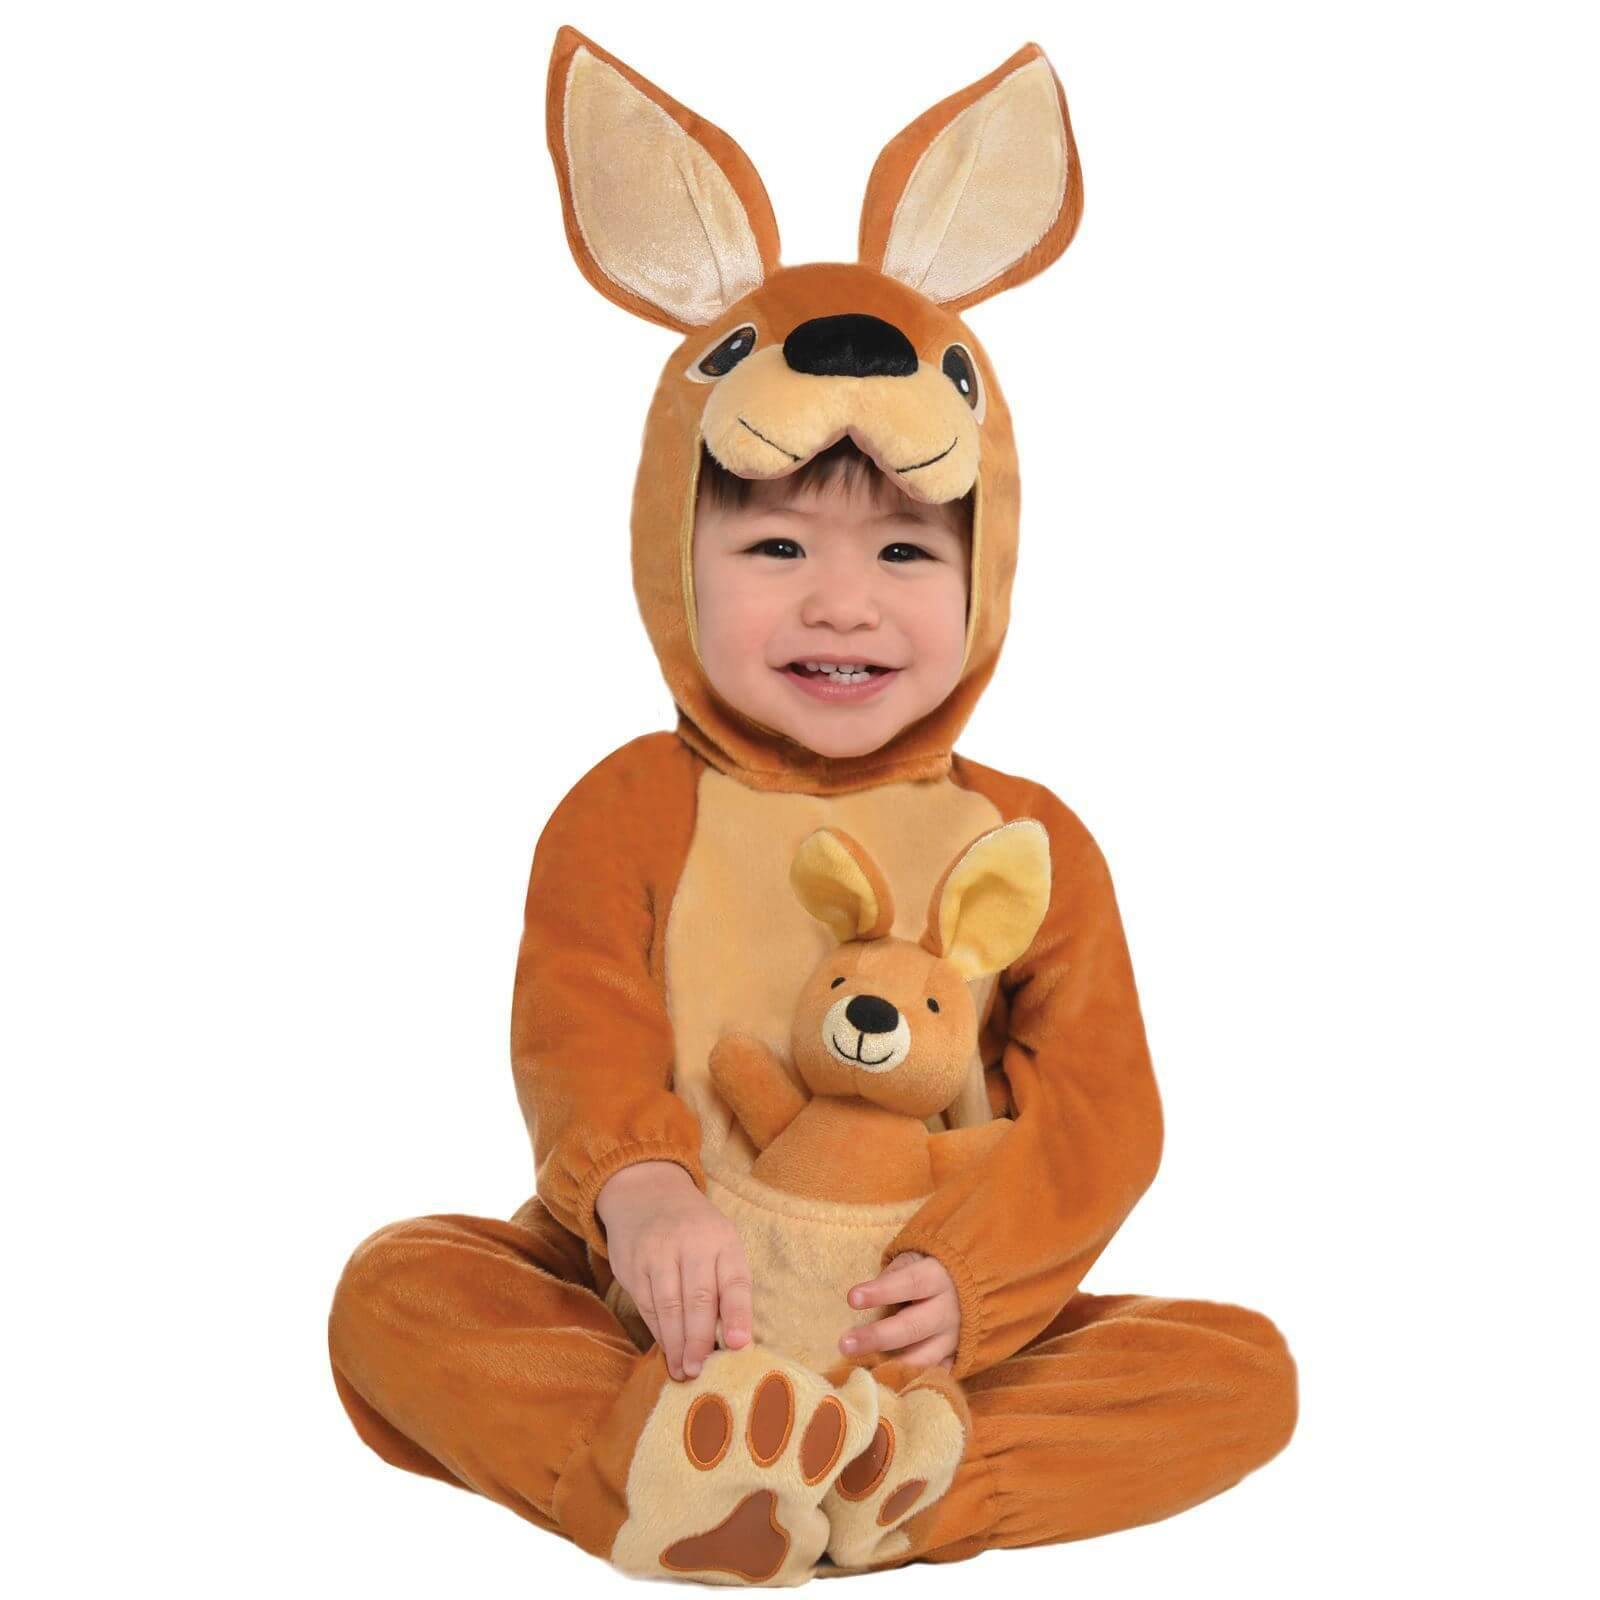 Infant Jumpin' Joey Costume Costumes & Apparel - Party Centre